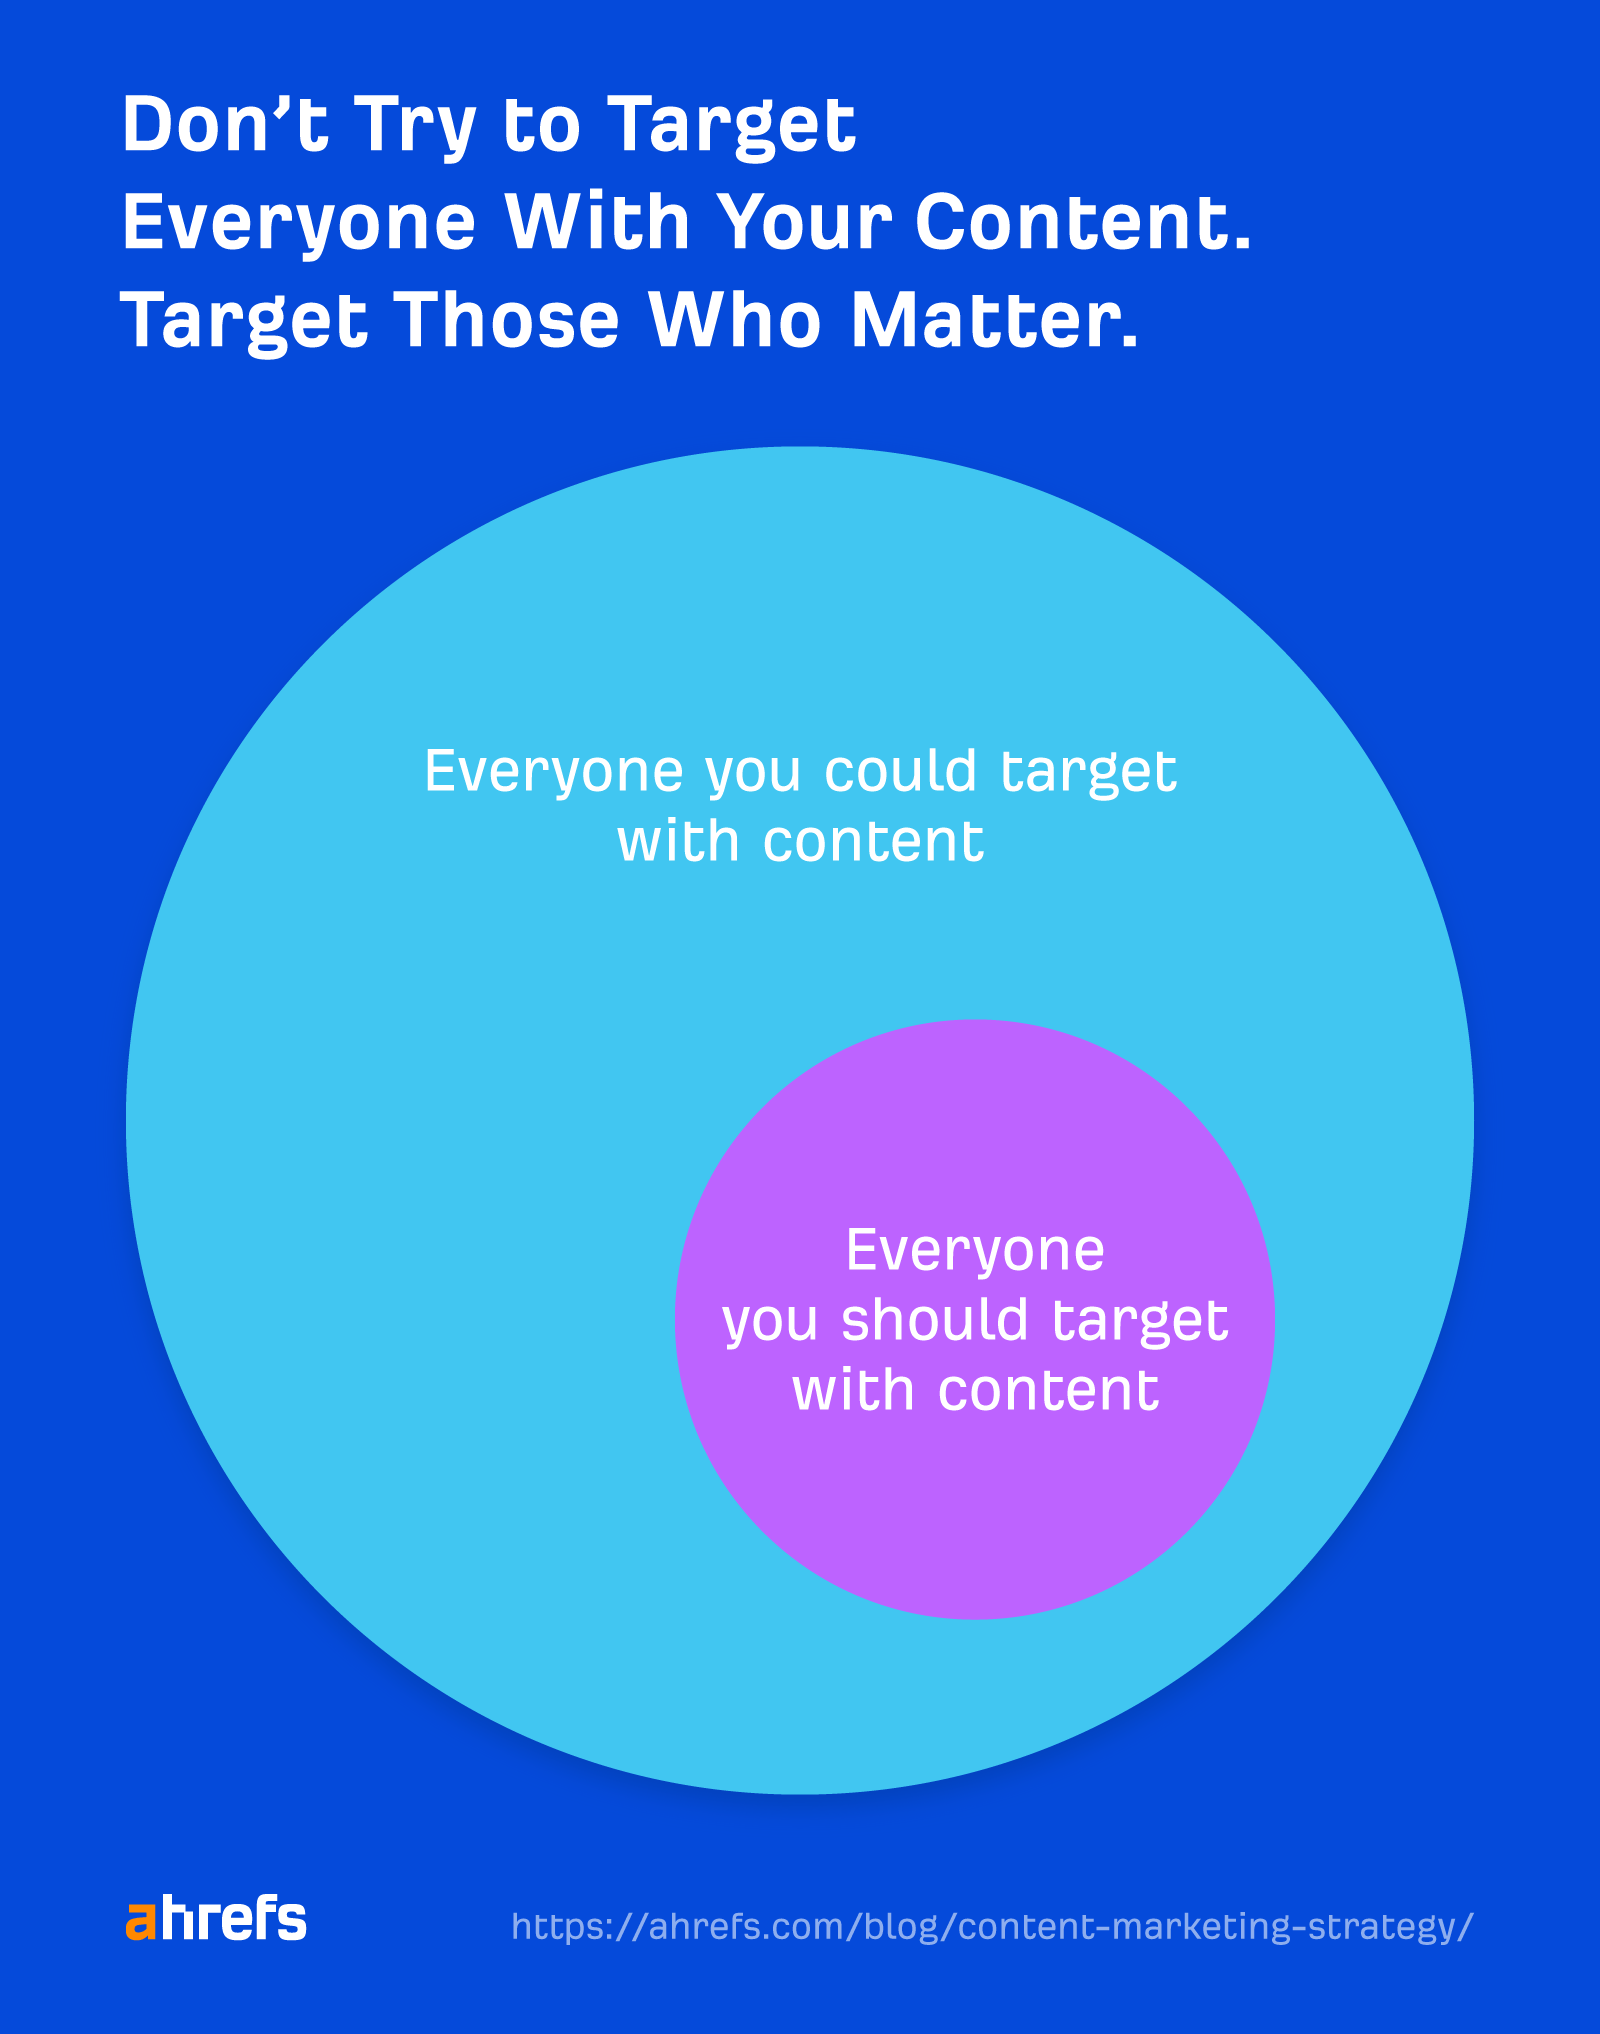 Never target everyone with content marketing but target those who matter